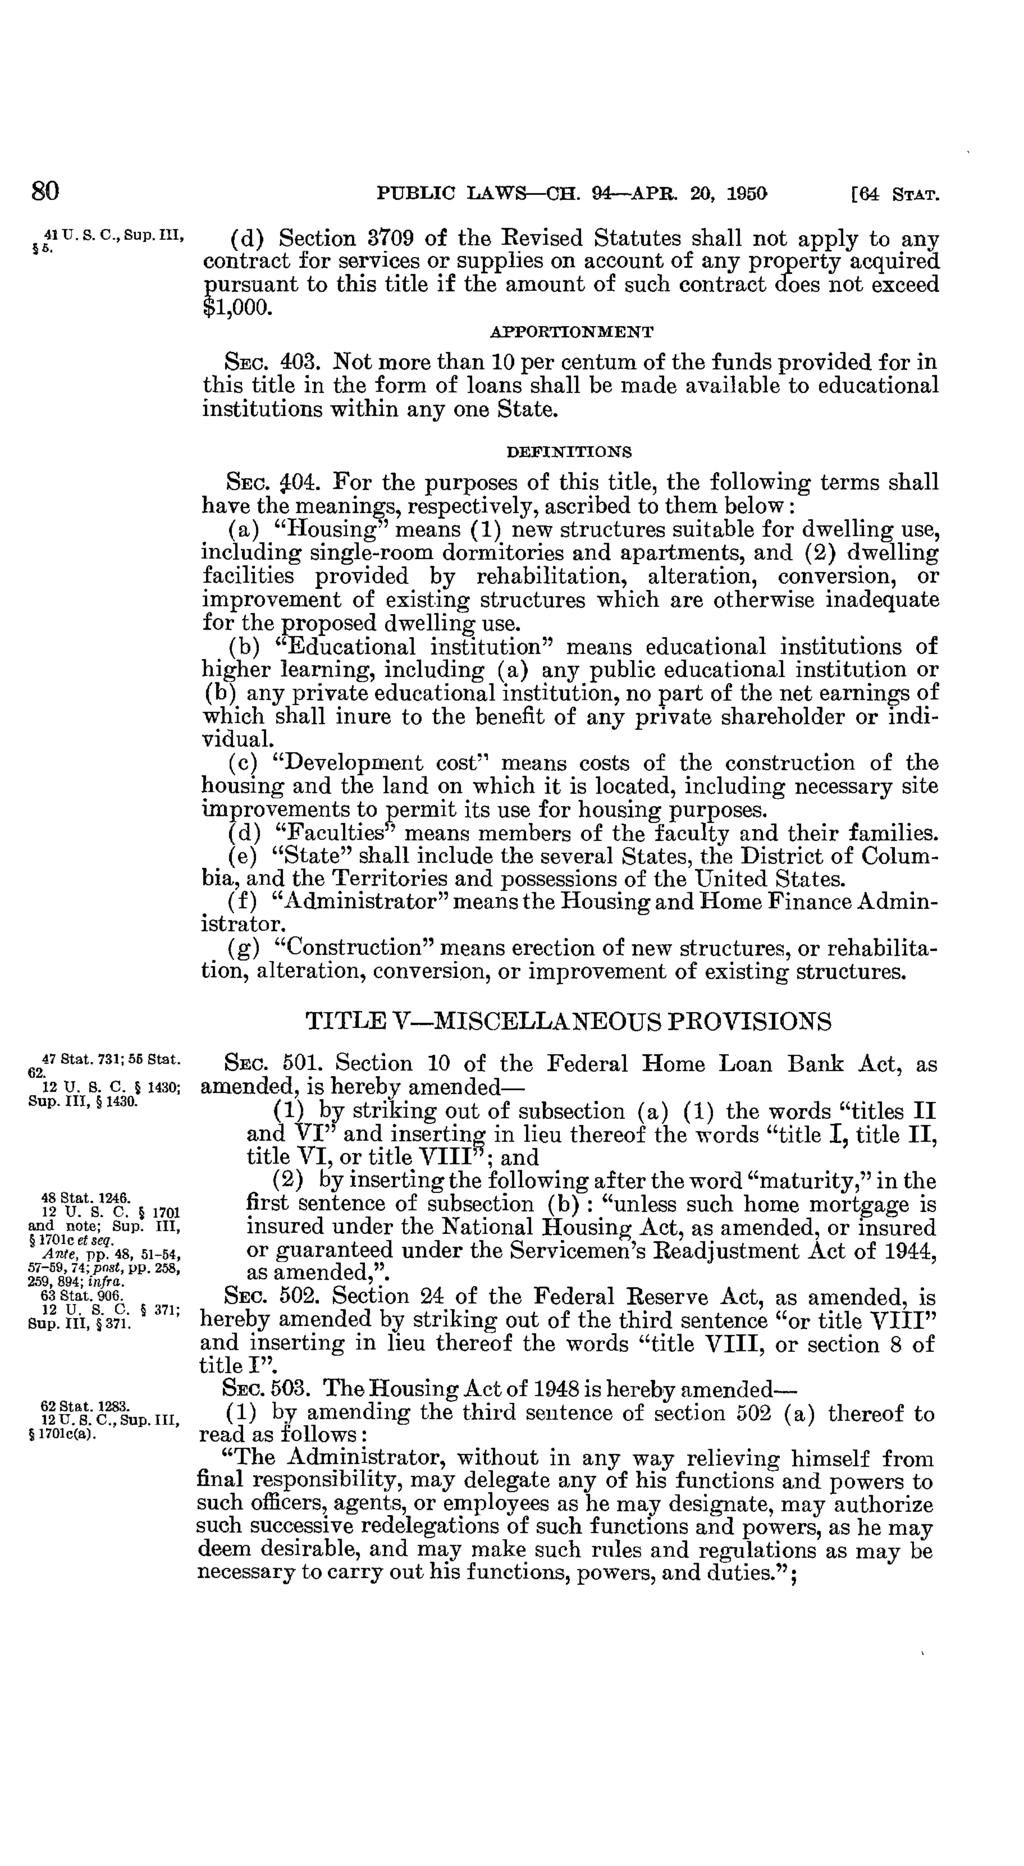 80 4115. S. C., Sup. III, is. PUBLIC LAWS-CH. 91 APR. 20, 1950 [64 STAT.